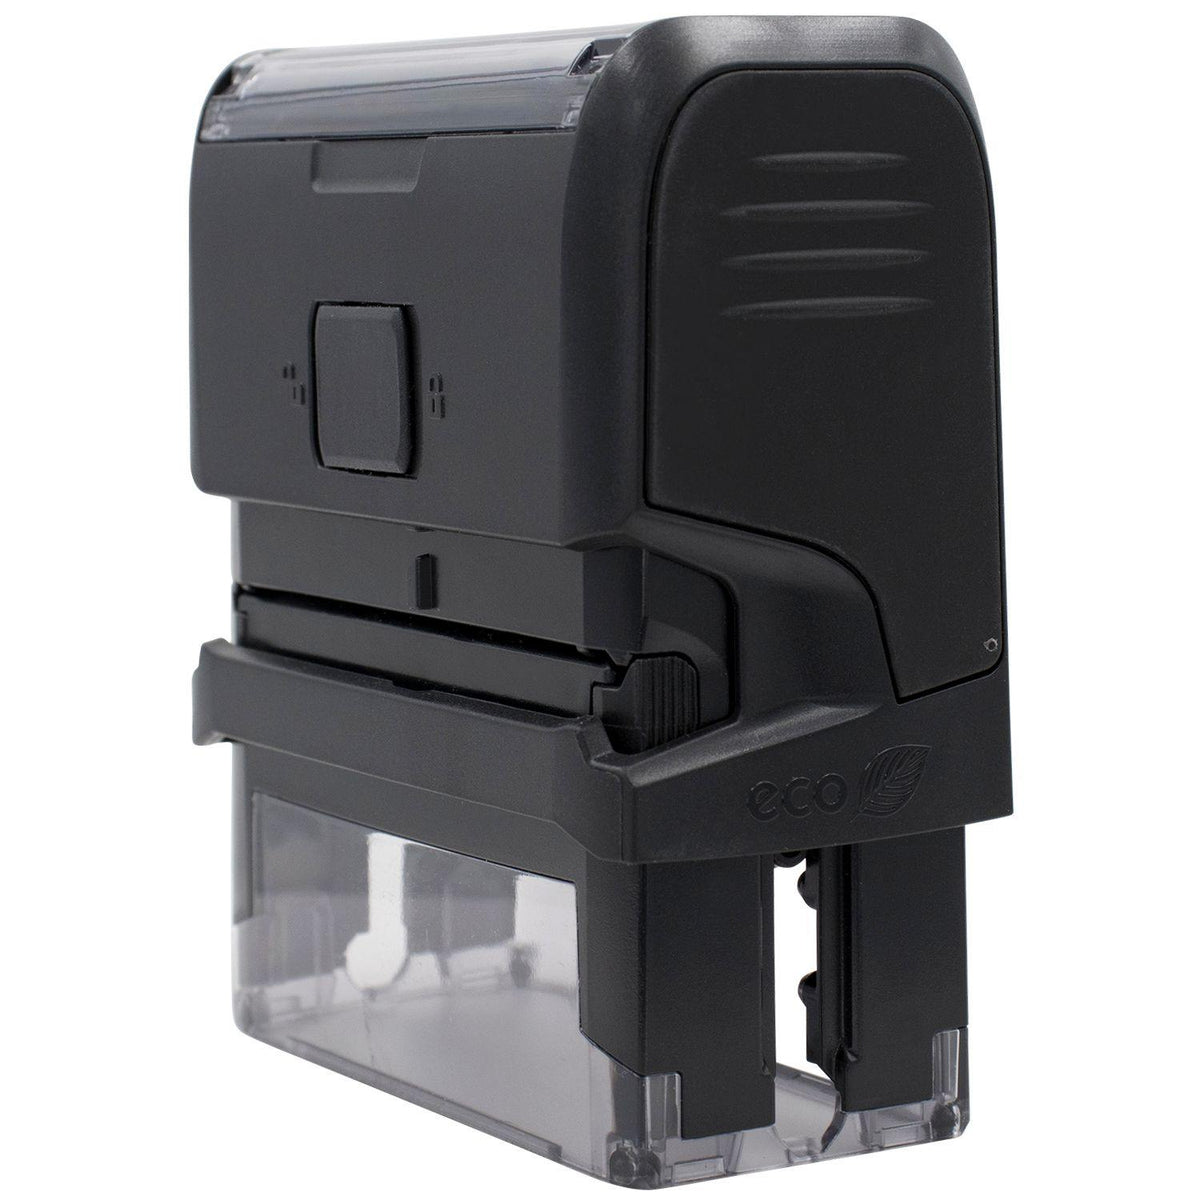 Large Self-Inking Received with In Box Icon Stamp - Engineer Seal Stamps - Brand_Trodat, Impression Size_Large, Stamp Type_Self-Inking Stamp, Type of Use_Shipping &amp; Receiving